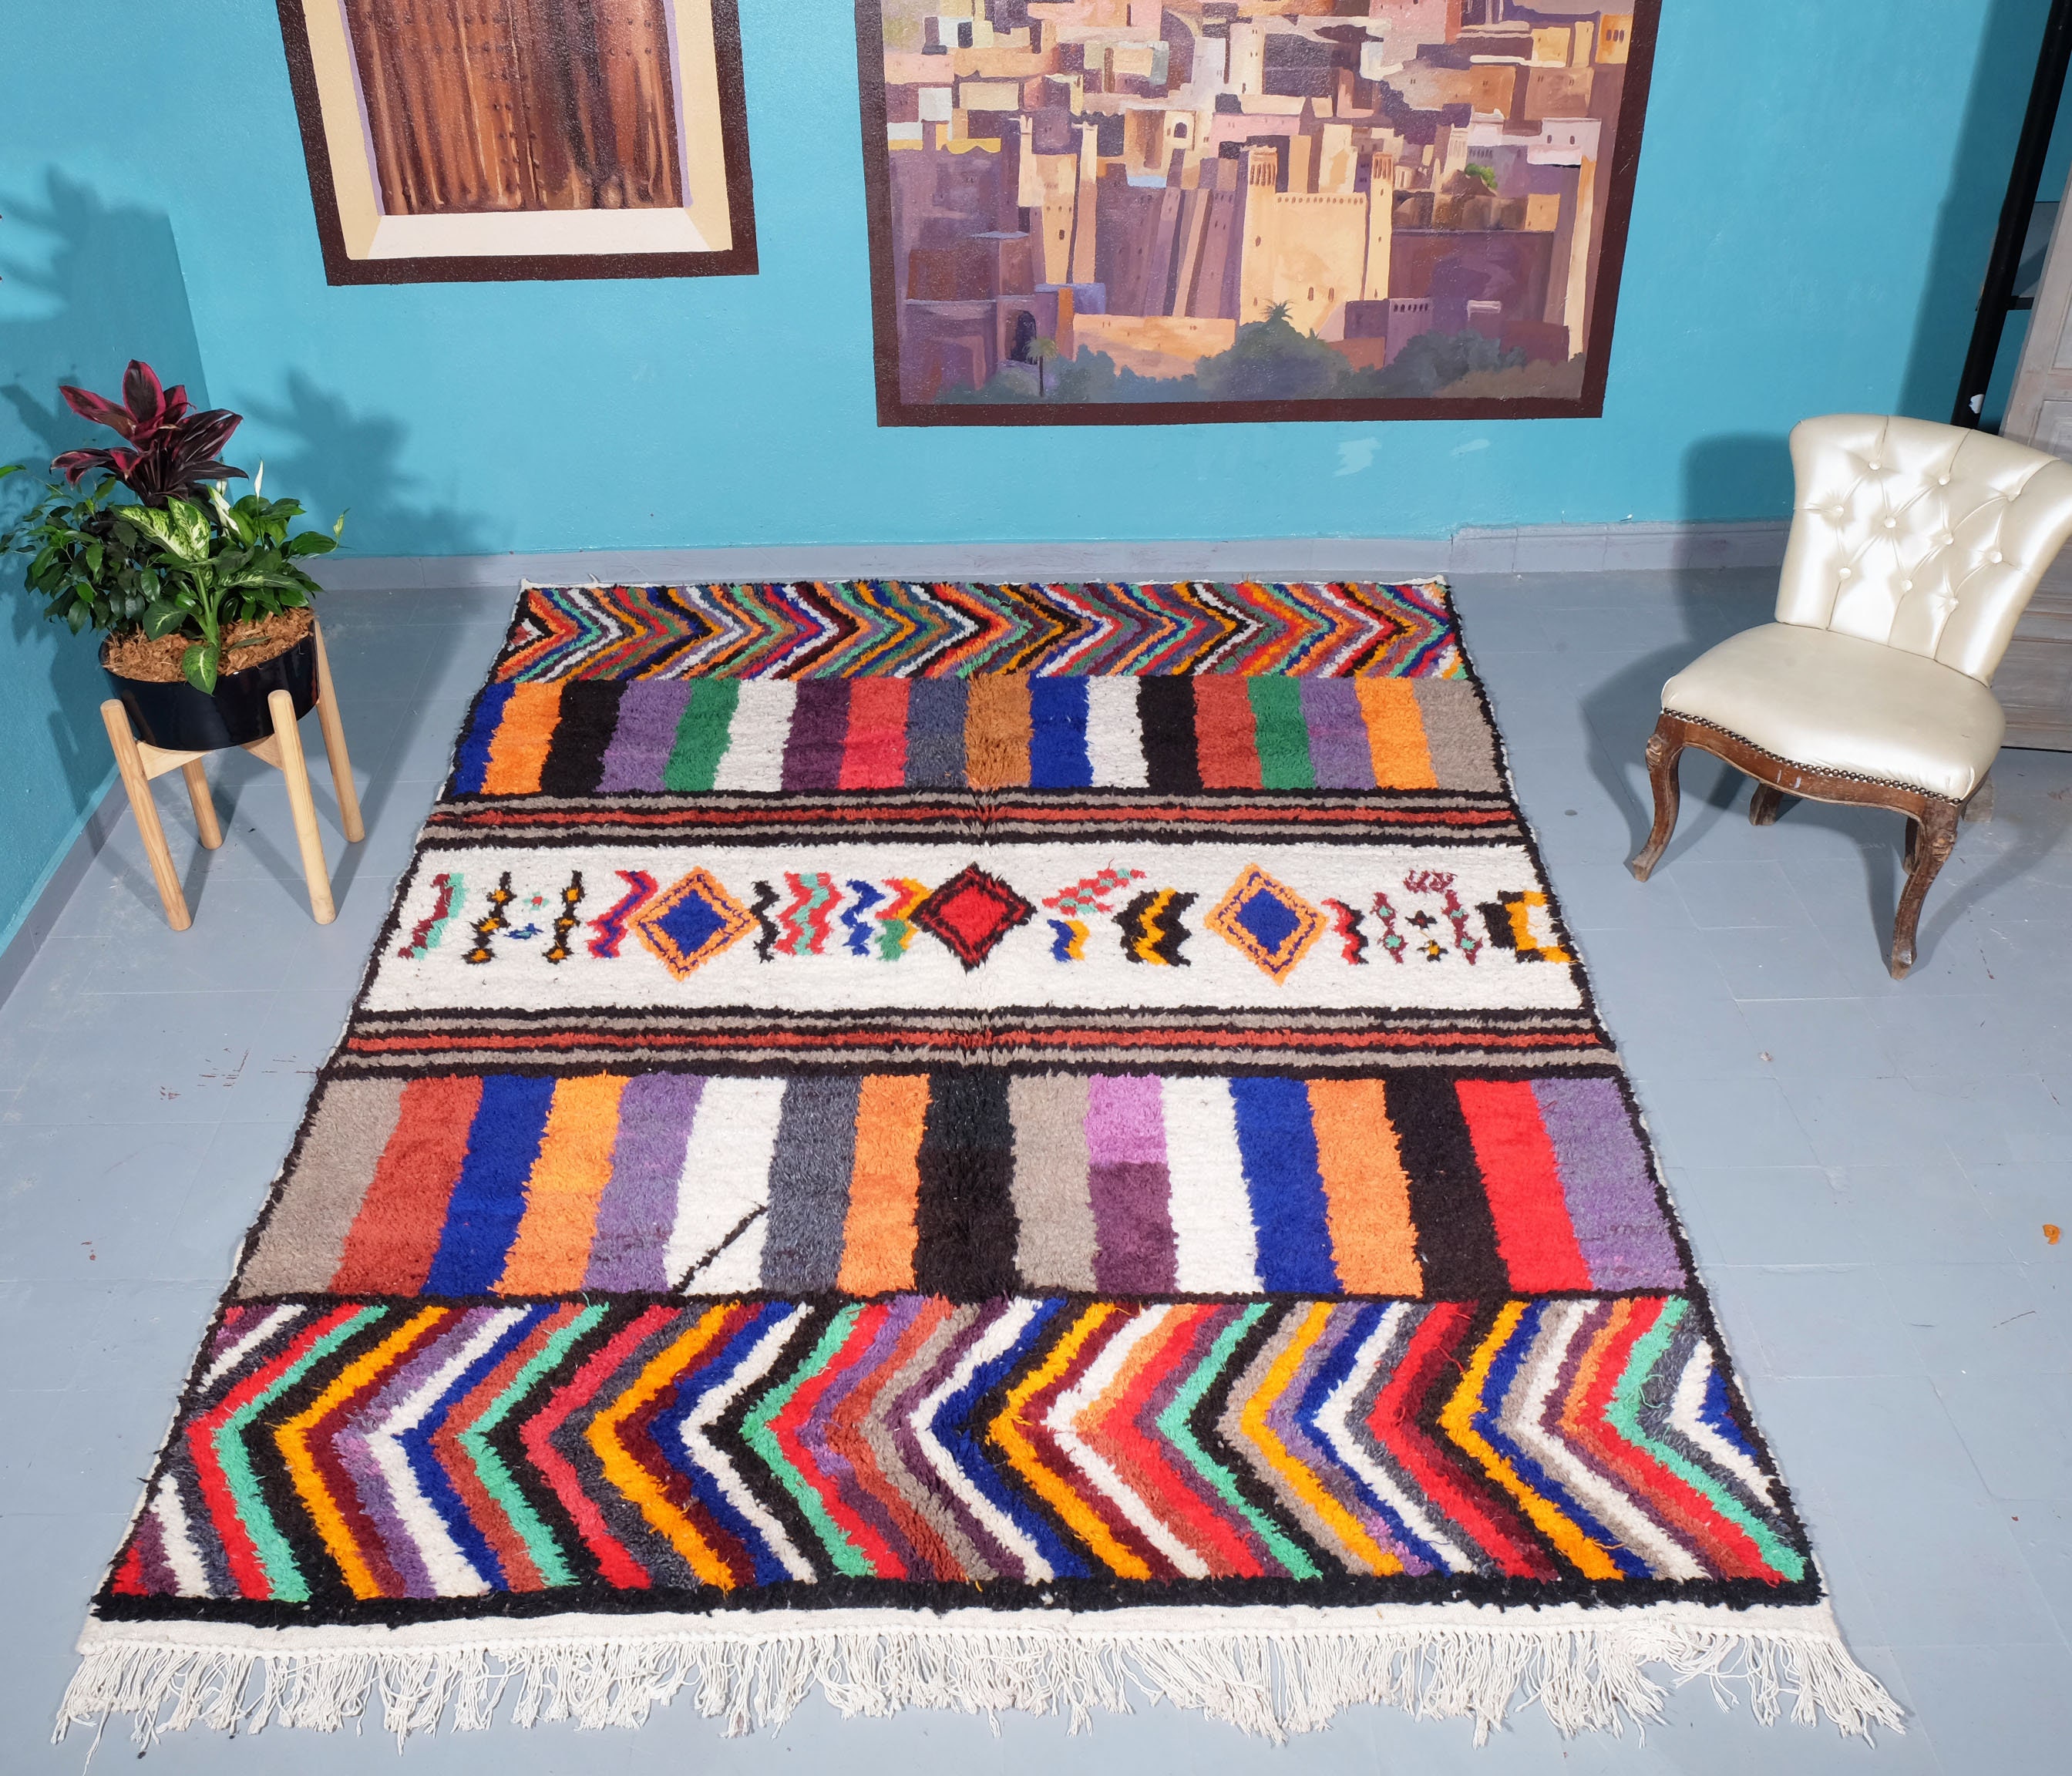 Moroccan Rug 8.95 Ft X 6.56 , Colorful Rug, Berber Moroccan Rug, Handmade Abstract From Morocco